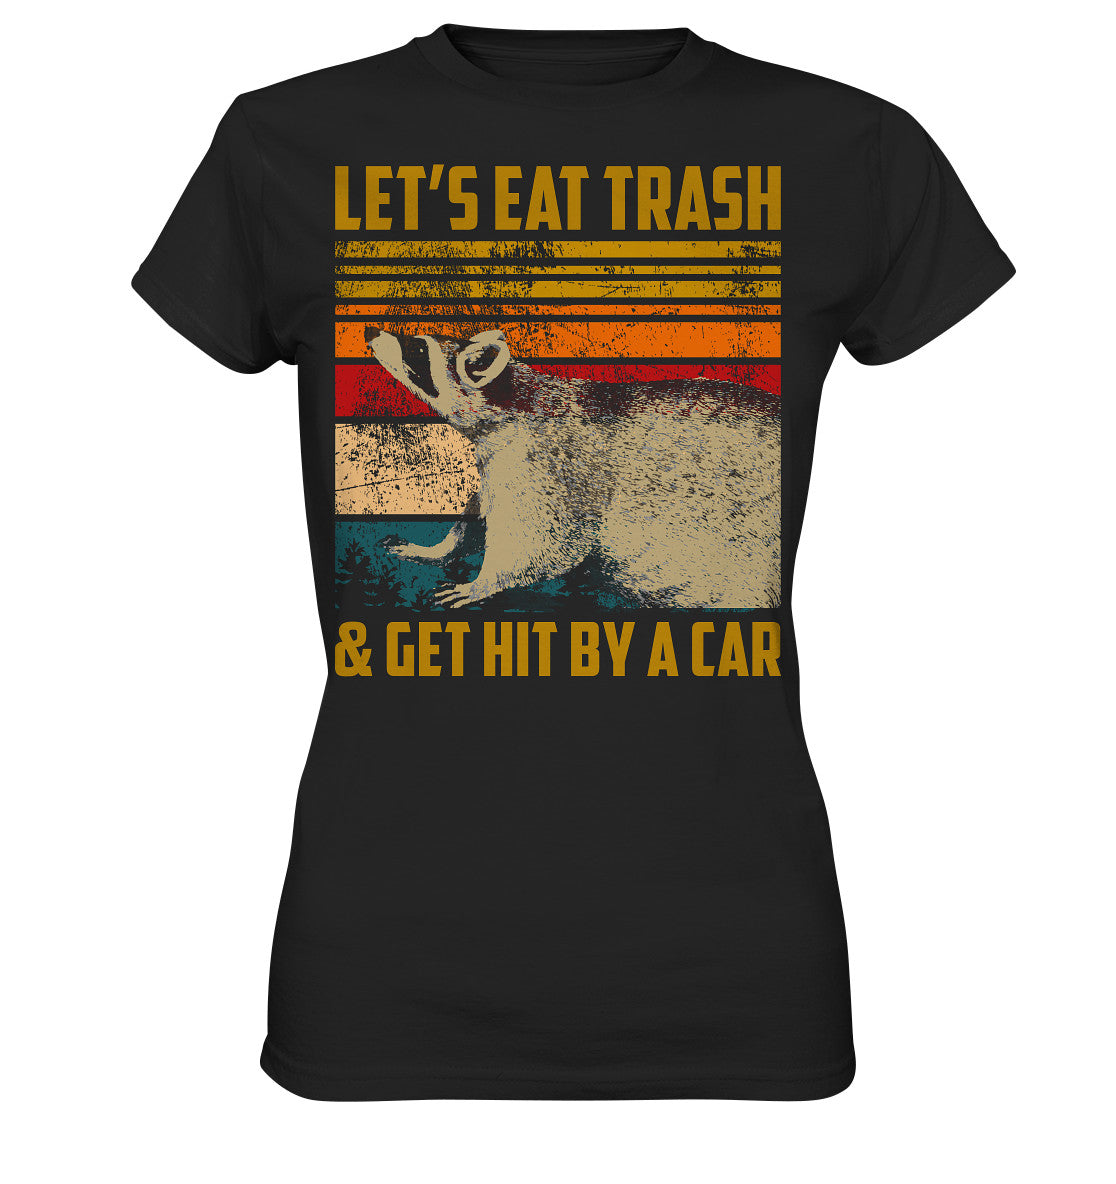 let's eat trash and get hit by a car - Ladies Premium Shirt